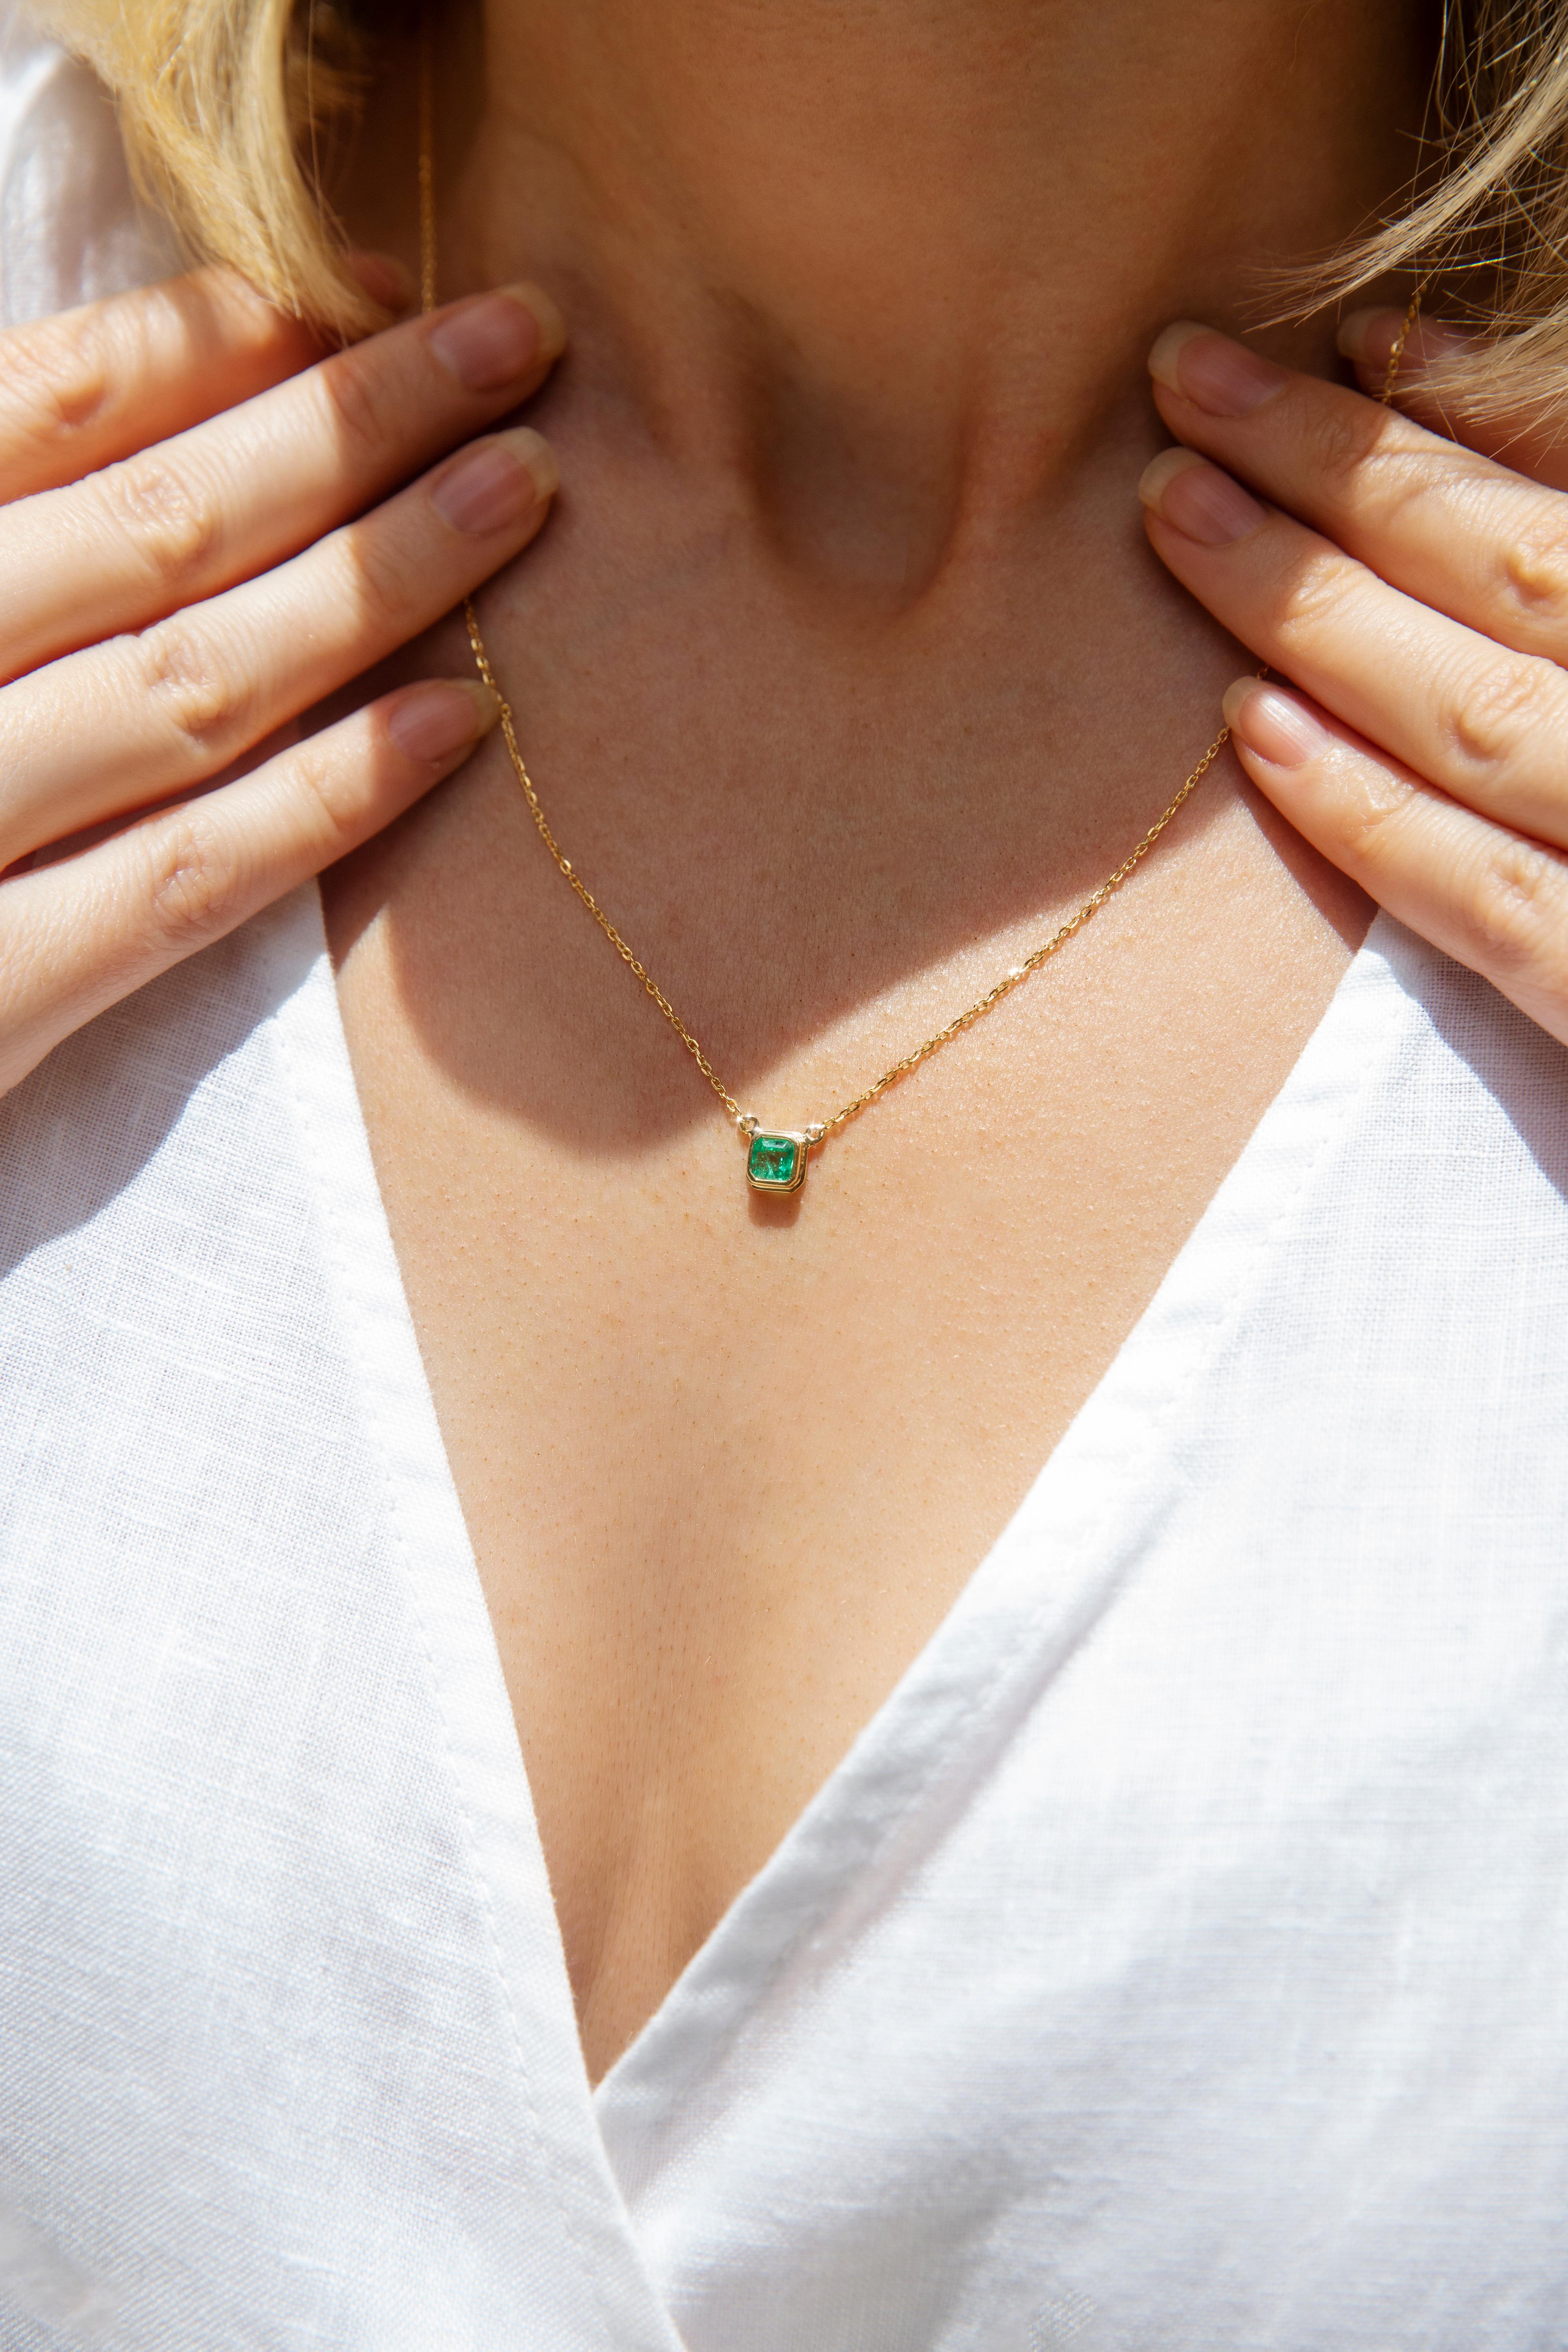 Women's Reinvented 18 Carat Yellow Gold Square Cut Emerald Pendant and Fine Chain